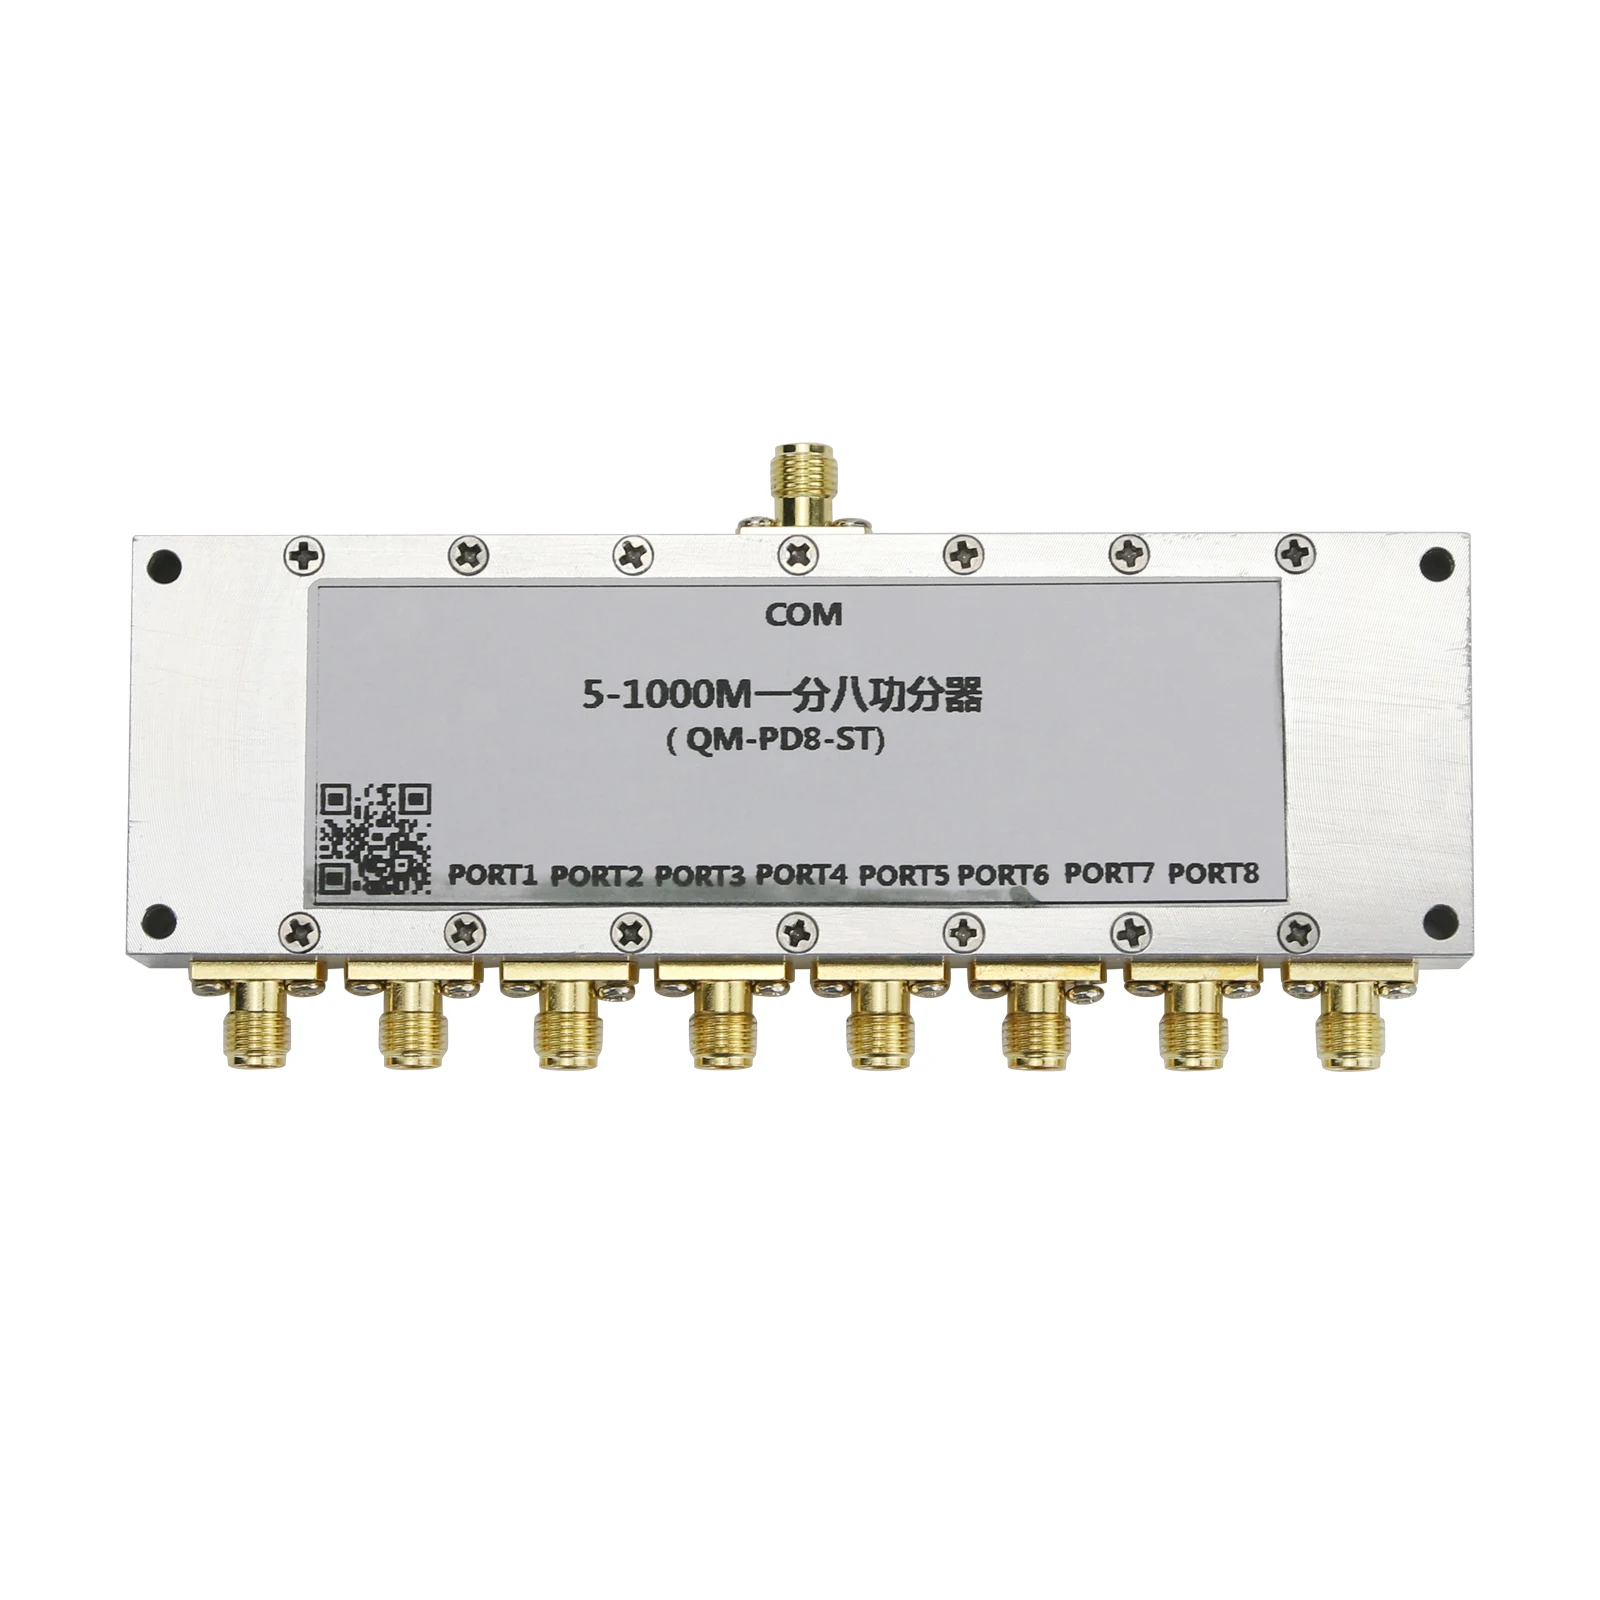 

QM-PD8-ST 5-1000M Power Divider VHF UHF One-To-Eight Power Splitter Power Combiner with S--MA Connectors